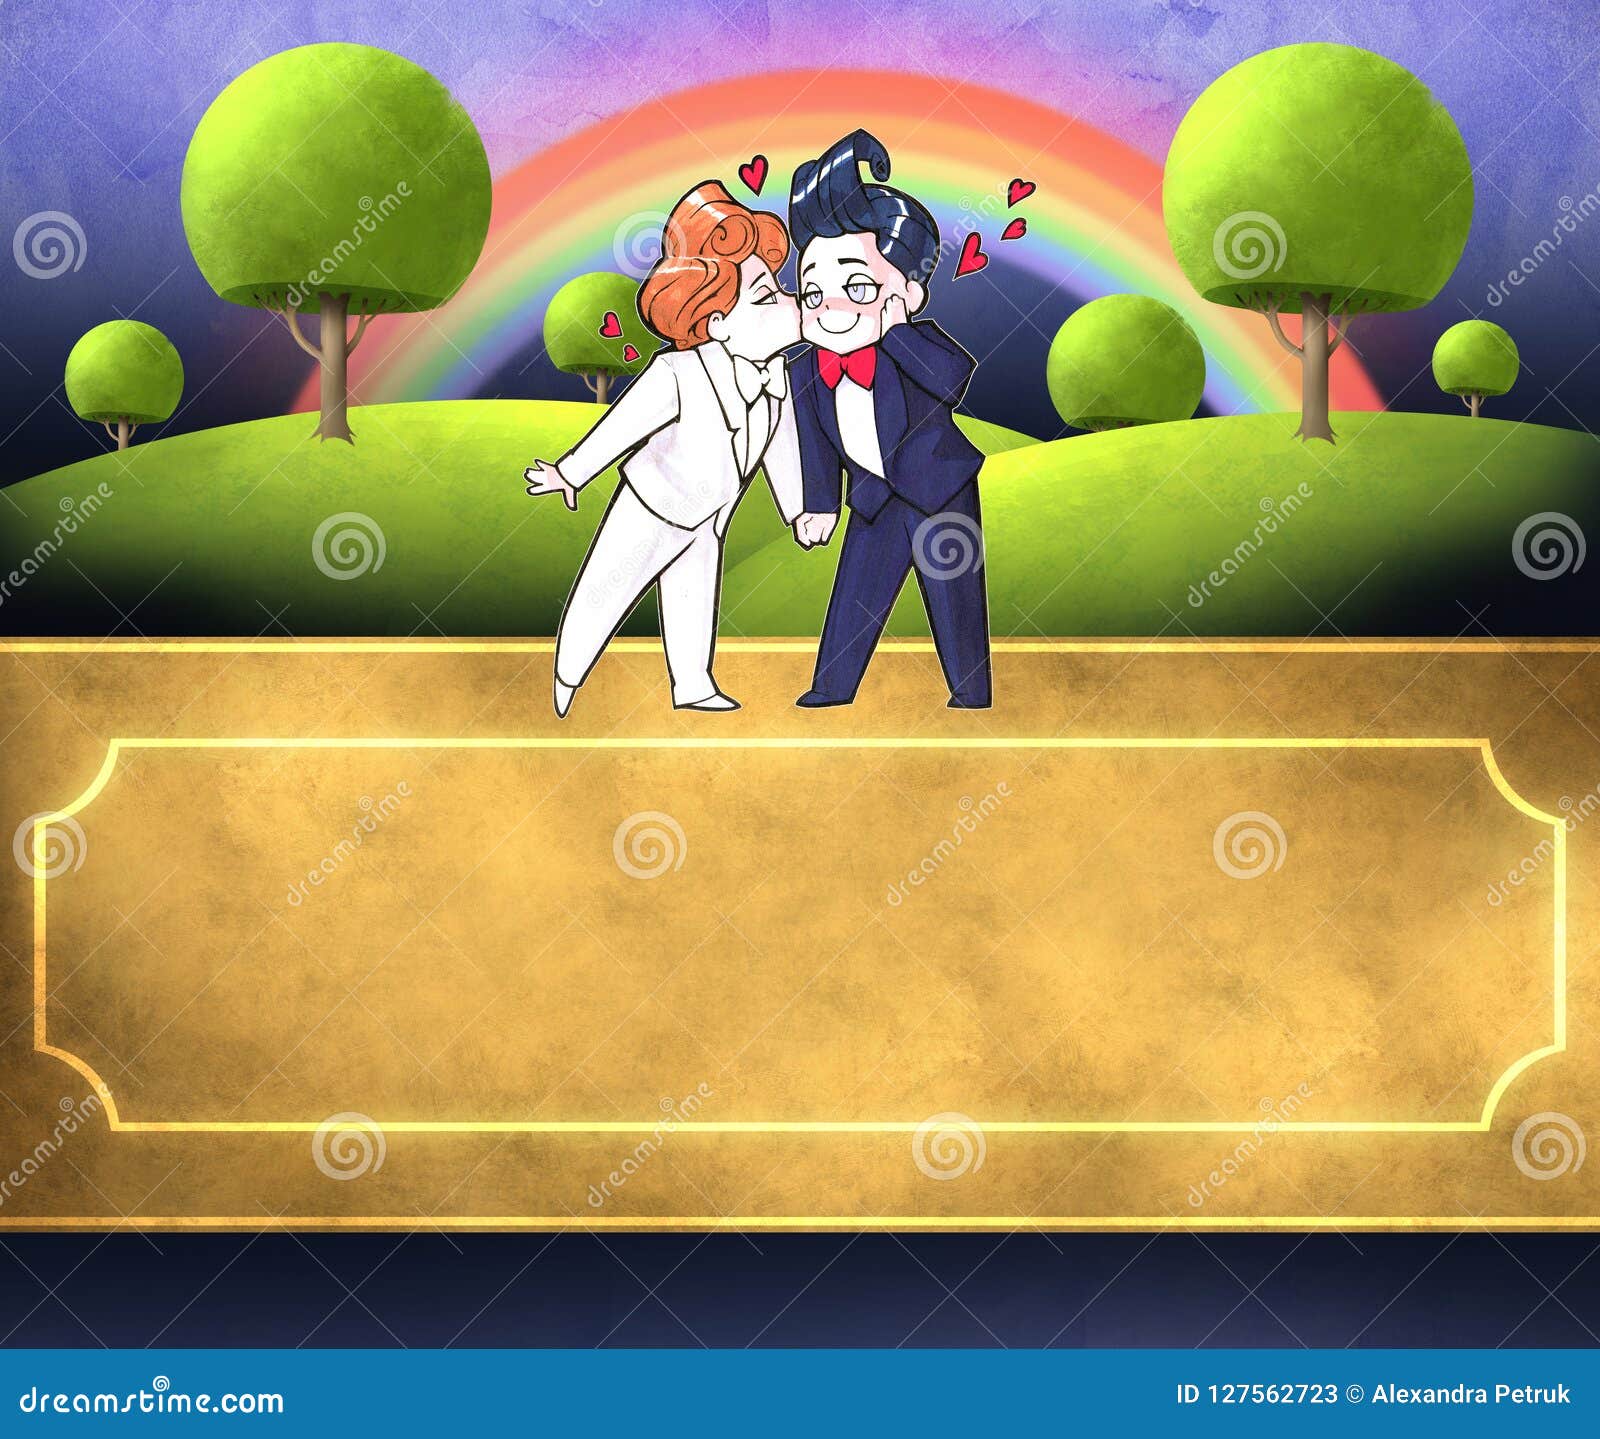 Cartoon Anime Illustration of Two Happy Handsome Men, Just Married Stock  Vector - Illustration of kawaii, human: 125134889